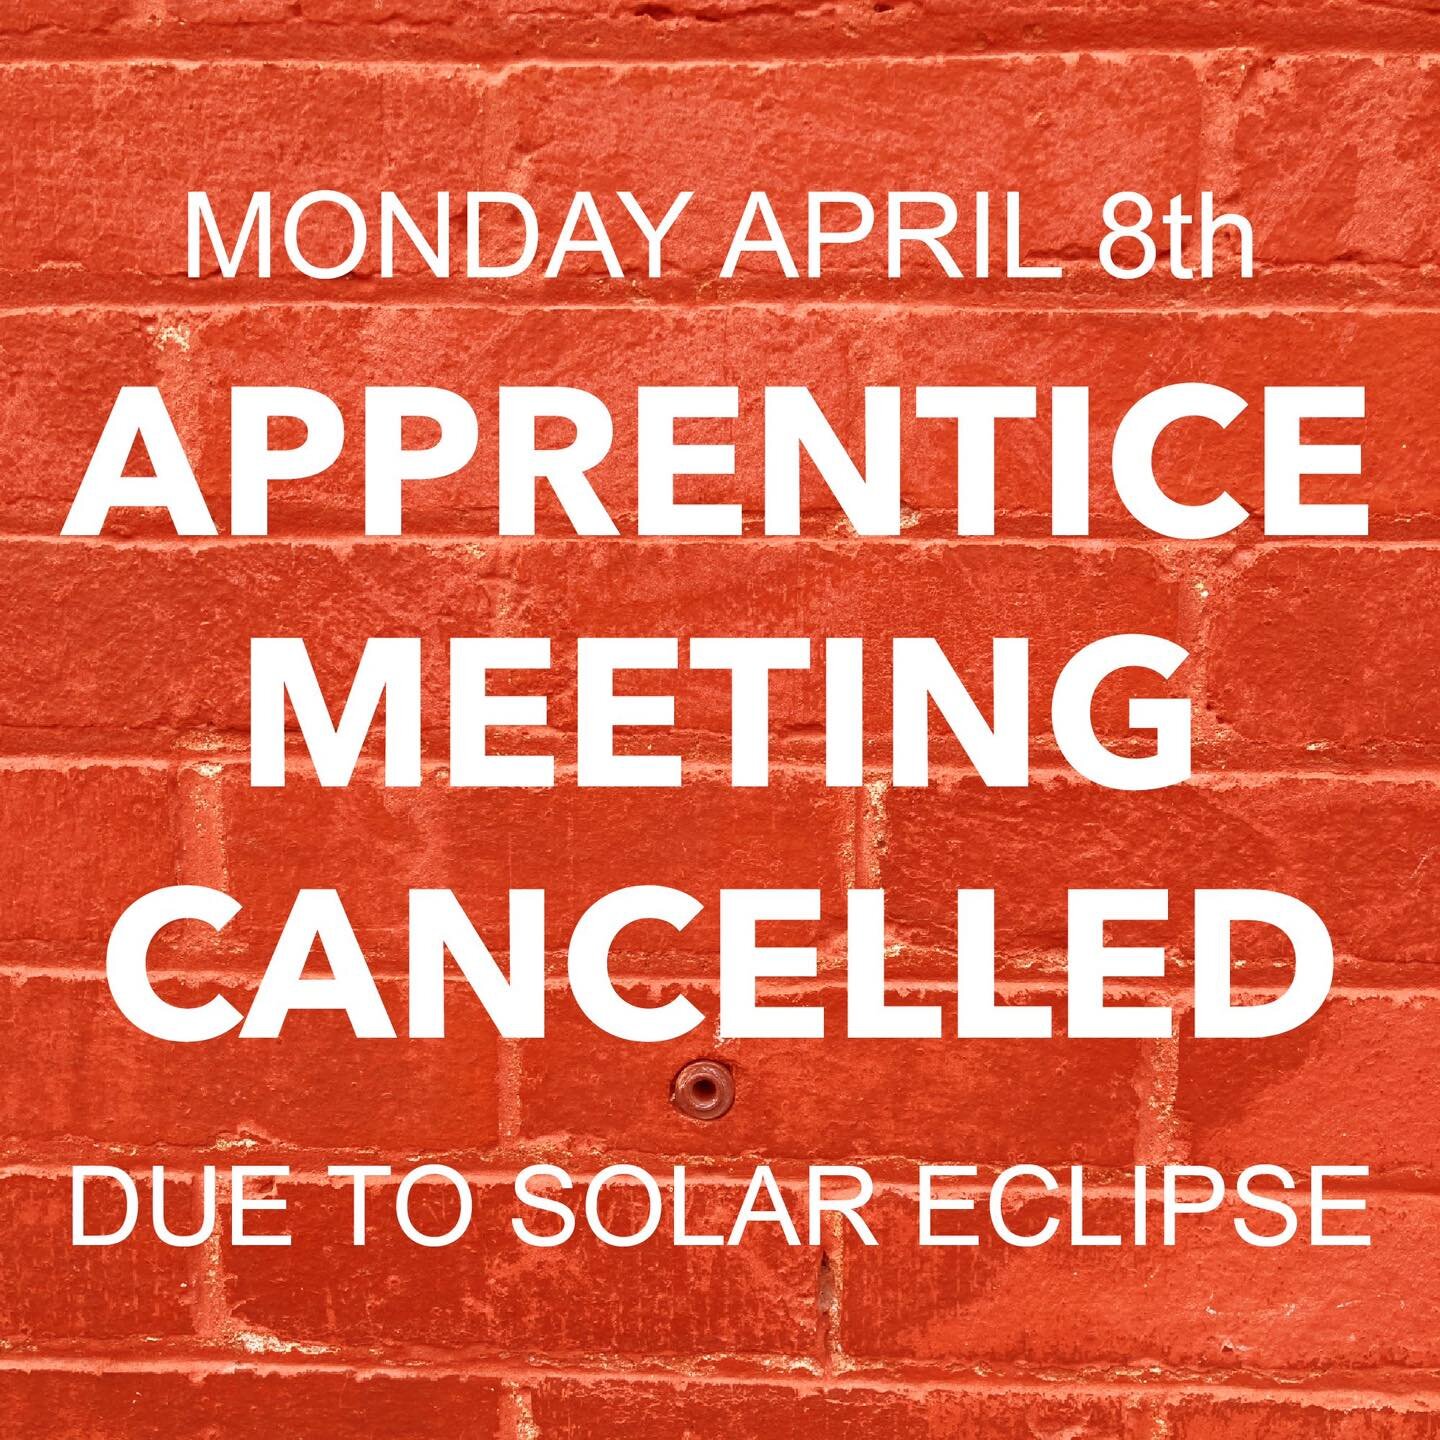 In light of the timing for tomorrow&rsquo;s solar eclipse, we have decided to cancel our Apprentice Meeting due to safety concerns. We&rsquo;ll see everyone on Thursday, and for half an hour longer! Stay safe, everyone, and (as per usual) don&rsquo;t